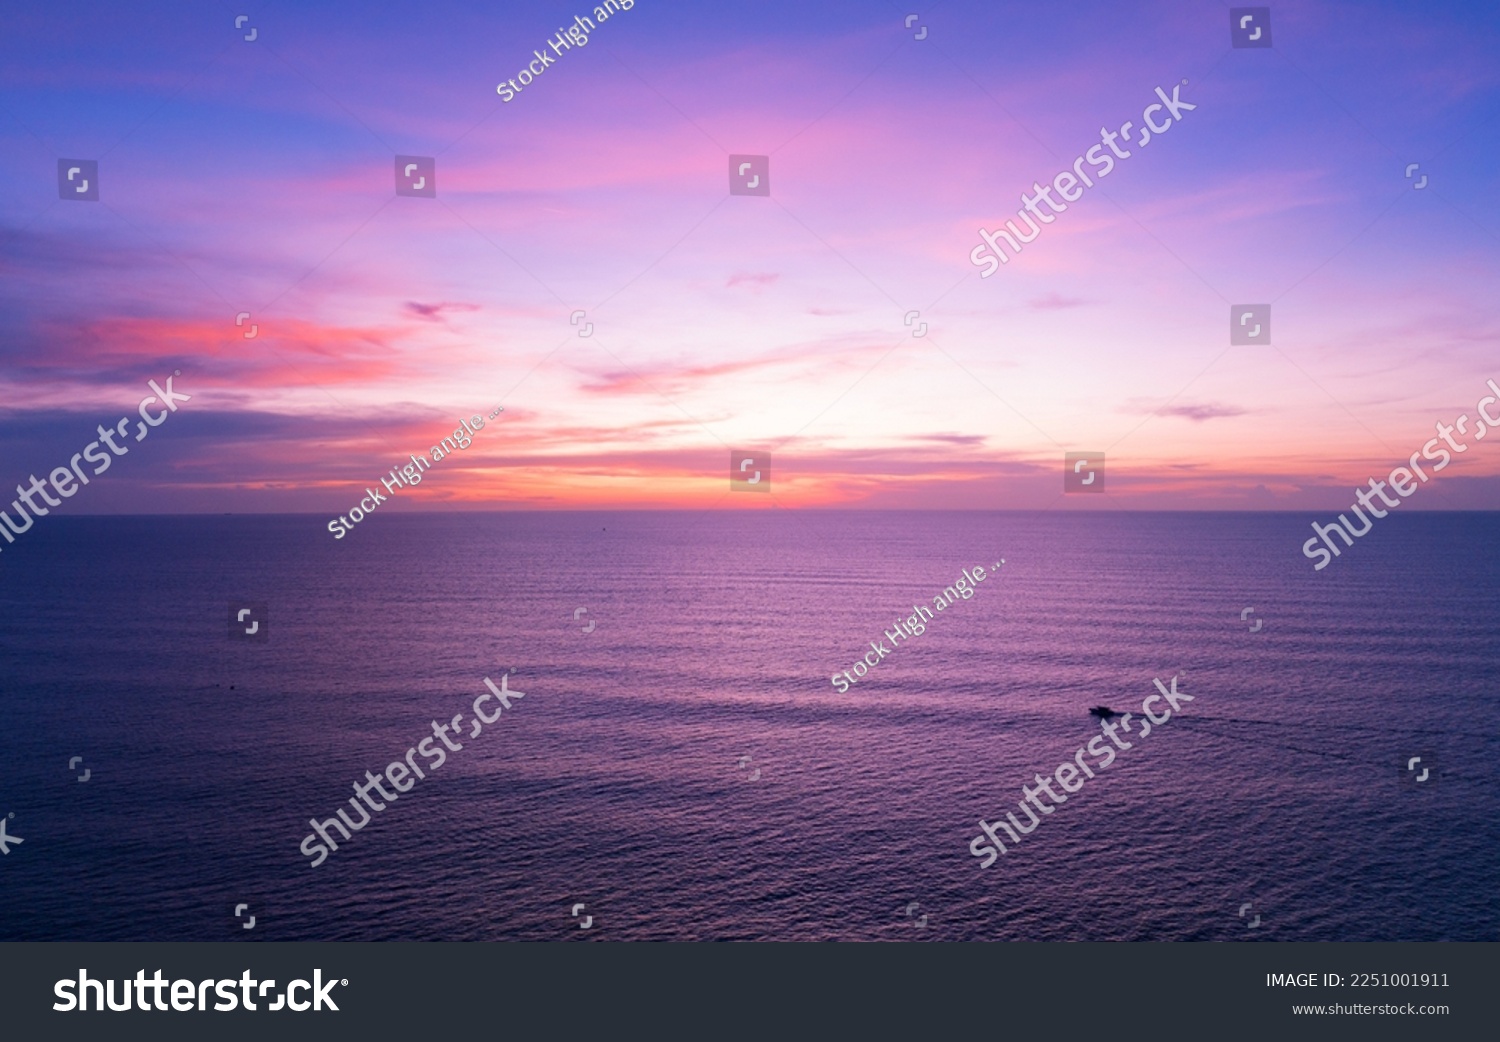 Aerial view sunset sky, Nature beautiful Light Sunset or sunrise over sea, Colorful dramatic majestic scenery Sky with Amazing clouds and waves in sunset sky purple light cloud background #2251001911